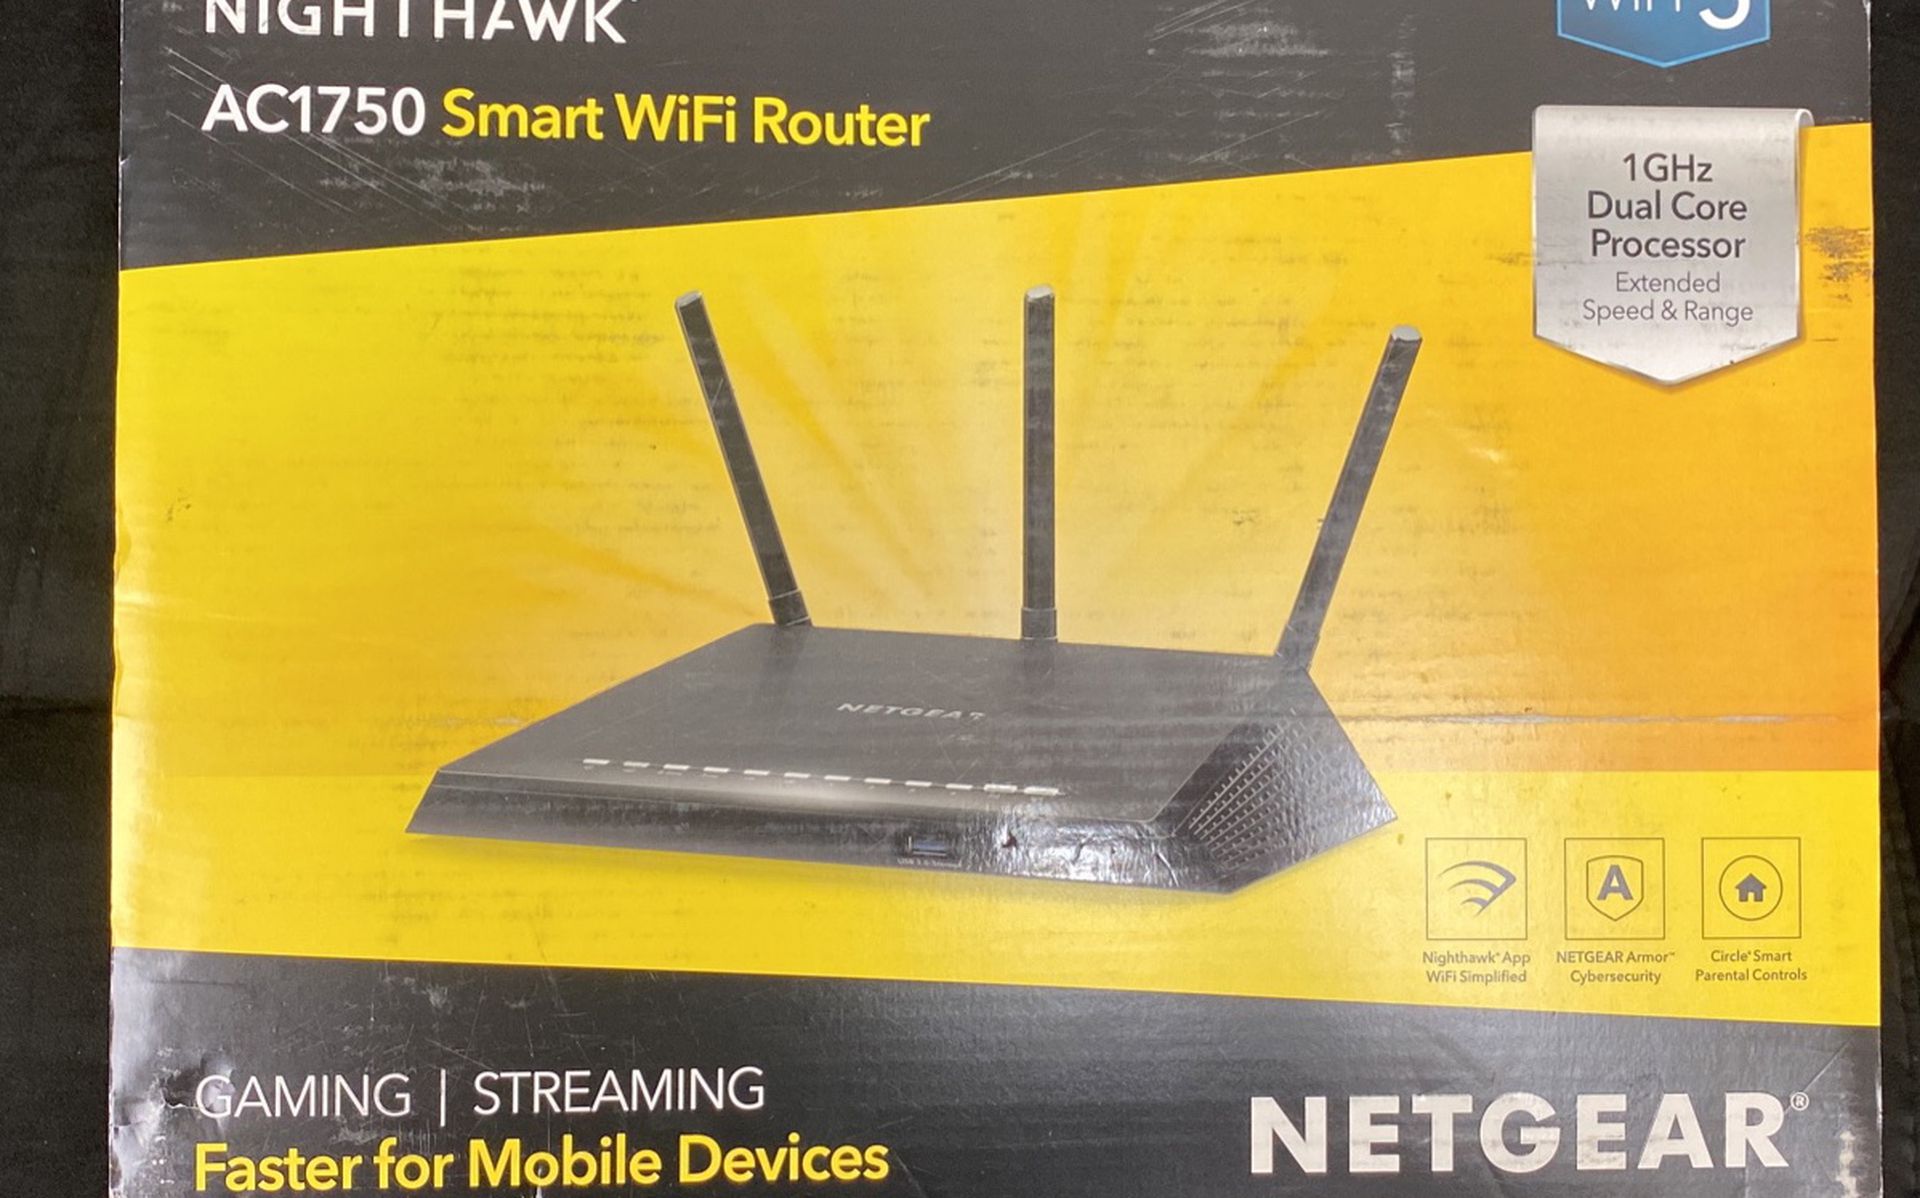 NETGEAR NIGHTHAWK Smart WiFi Router For Gaming And Streaming